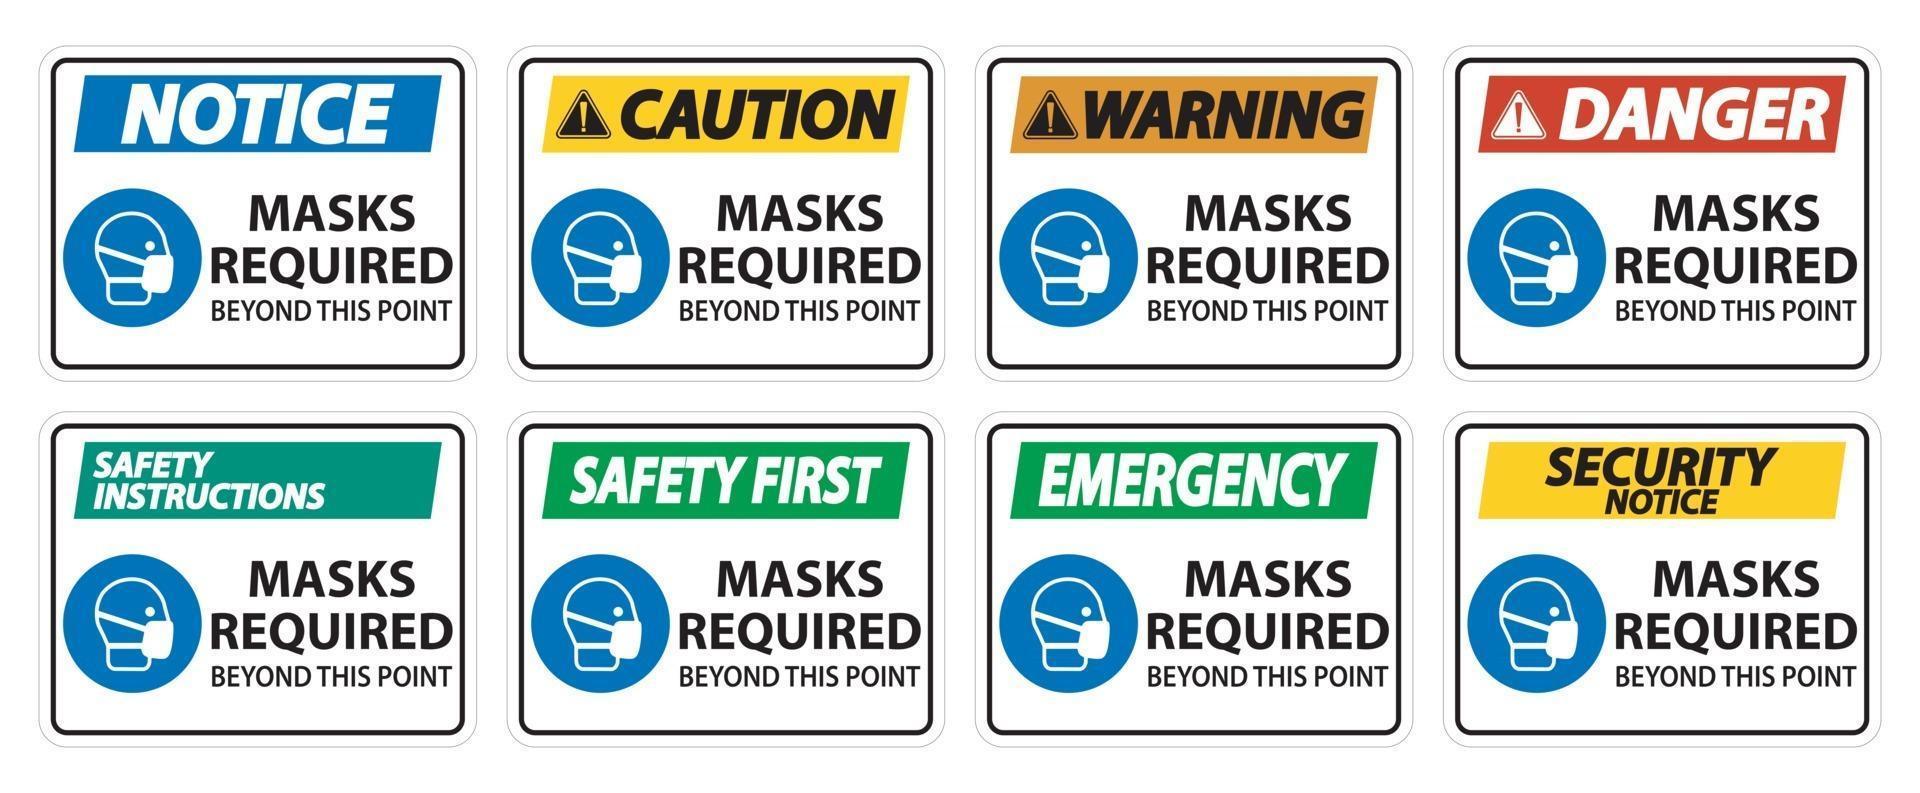 Masks Required Beyond This Point Sign Isolate On White Background,Vector Illustration EPS.10 vector